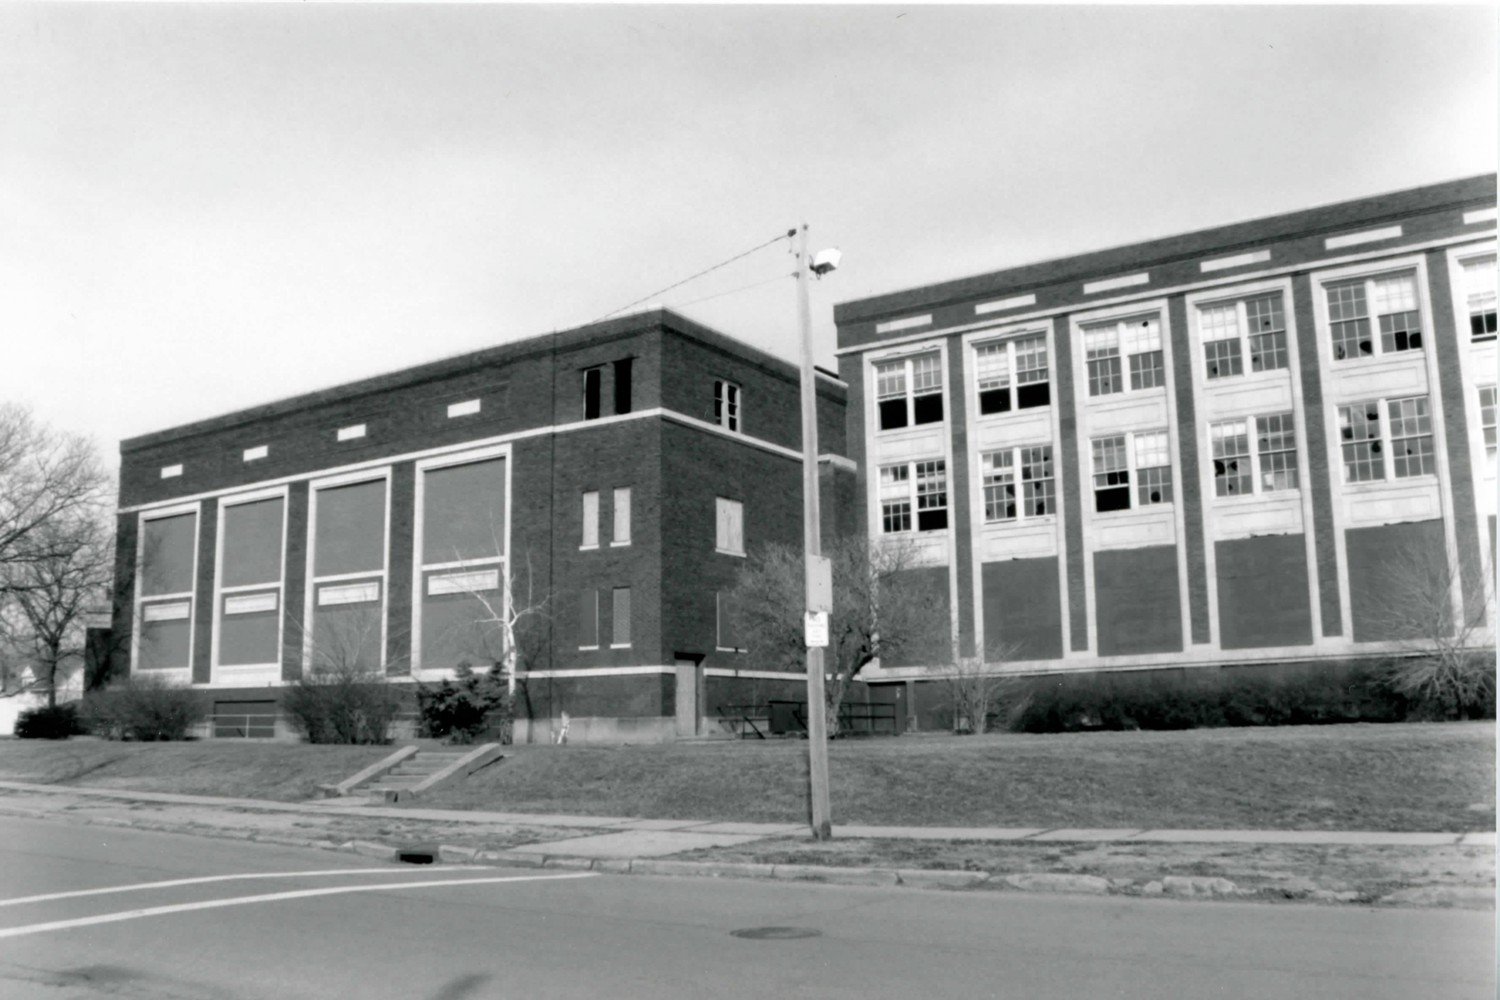 West Technical High School, Cleveland Ohio South Elevation looking northwest (2000)